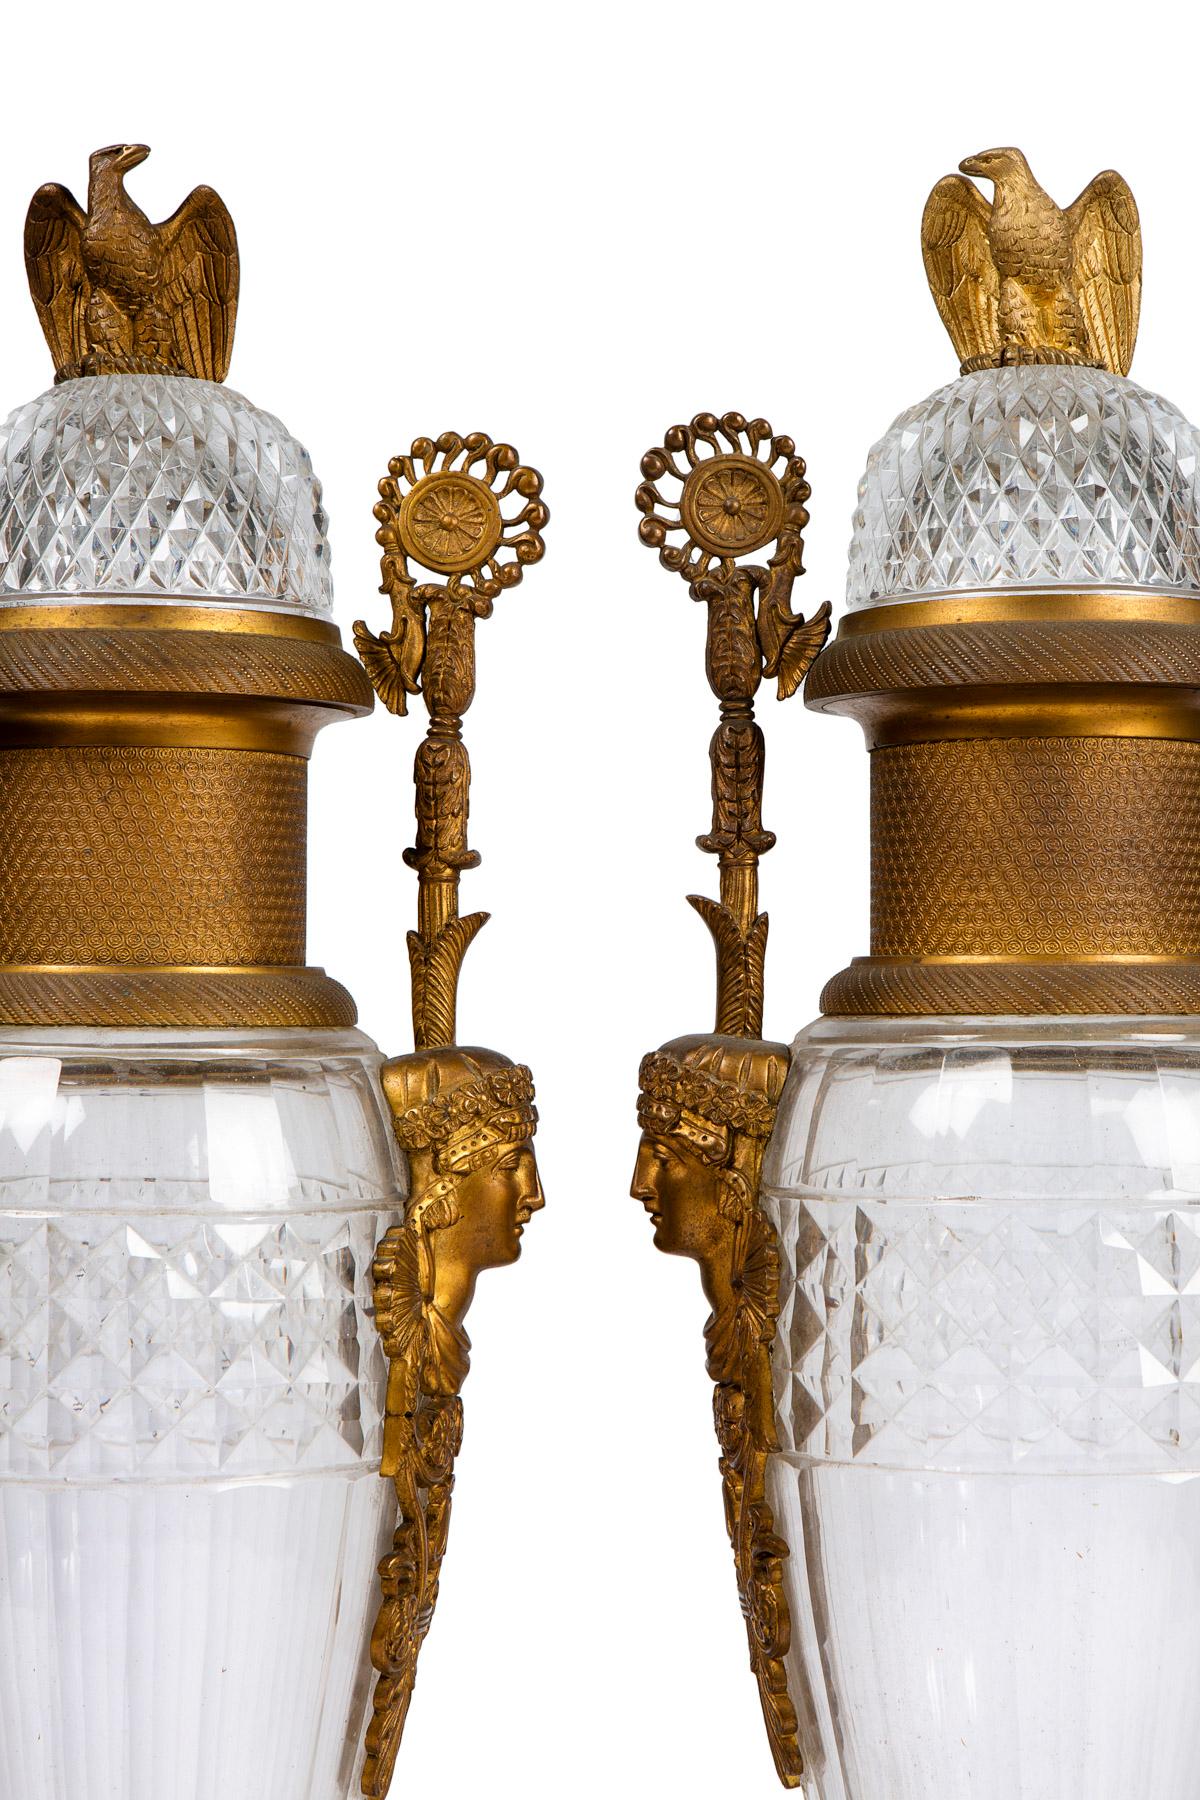 Pair of french empire style late 19 century crystal cut ormolu bronze original gilting
 You have eagle that embeds the base at the 4 corner, on the side of the vase you have magnificent women,s heads bronze surmonted by handles , the lids on the